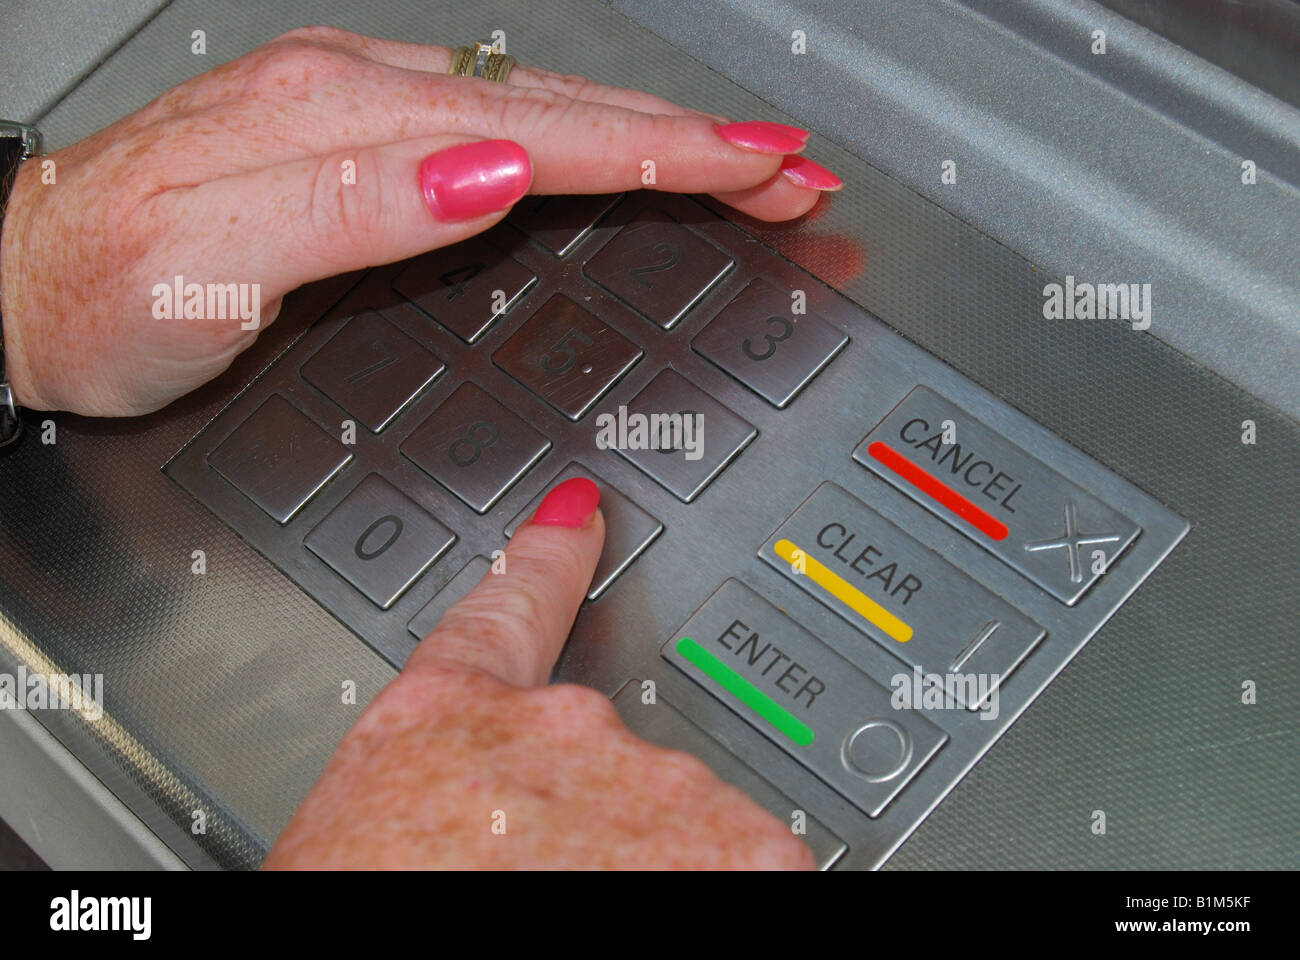 Woman guarding her security code with her hand on cash machine, Ascot, Berkshire, England, United Kingdom Stock Photo